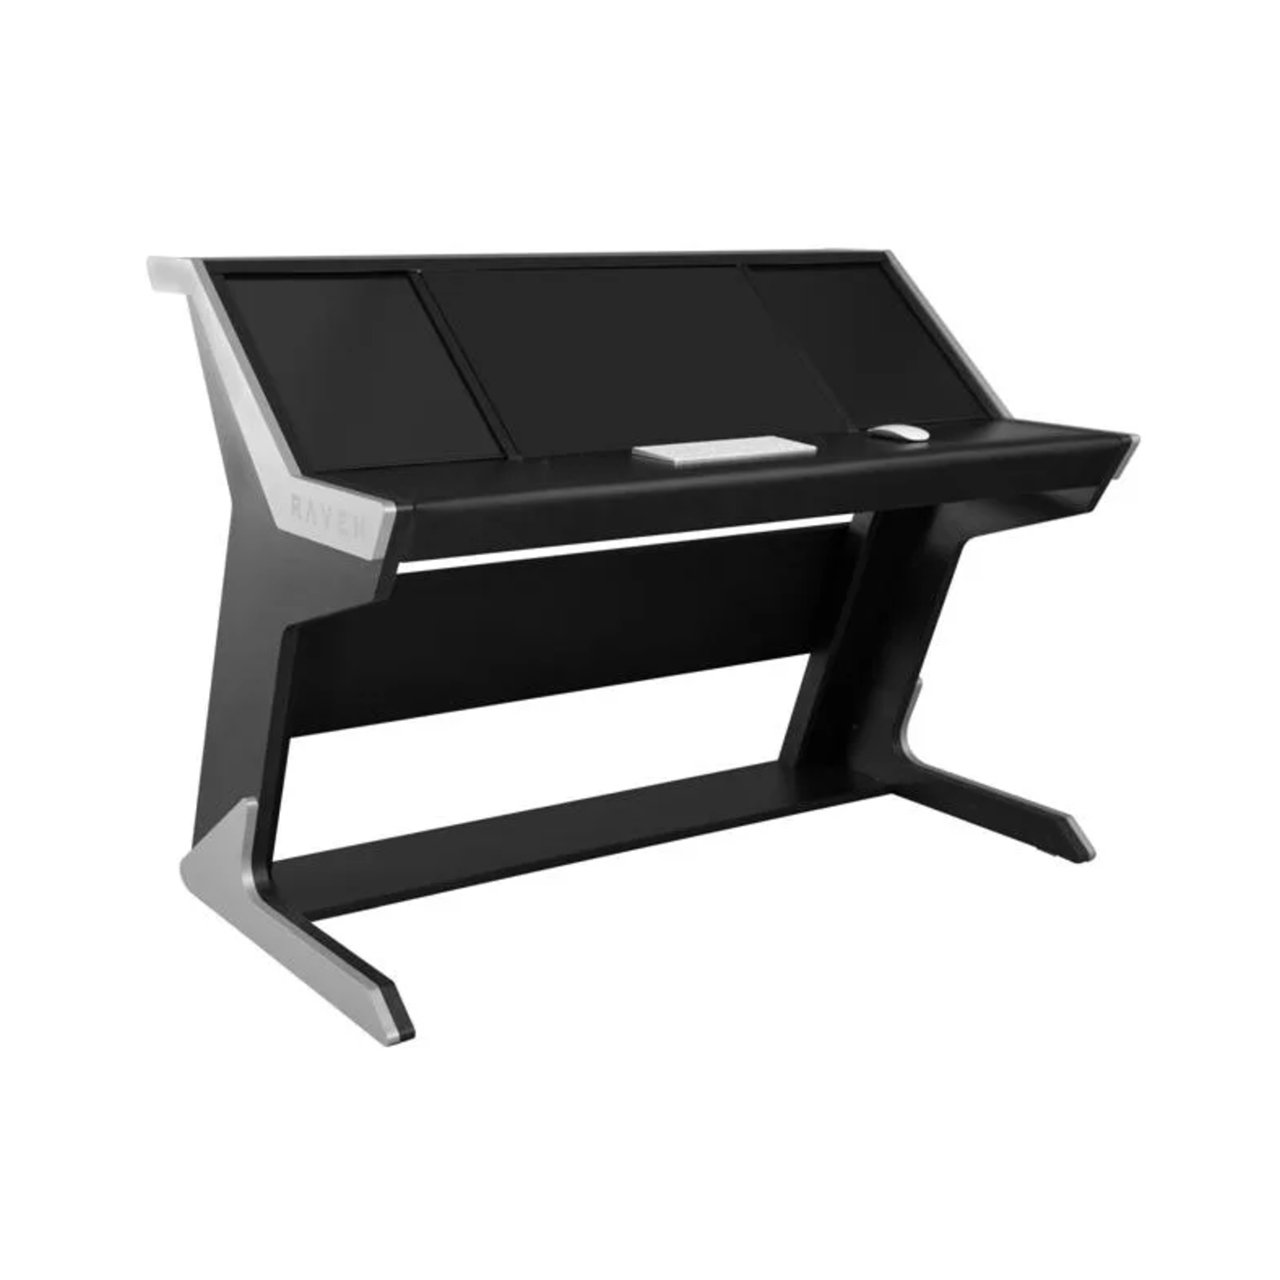 Control Surfaces - Slate Media Technology RAVEN MTi CORE Station – Desk Only